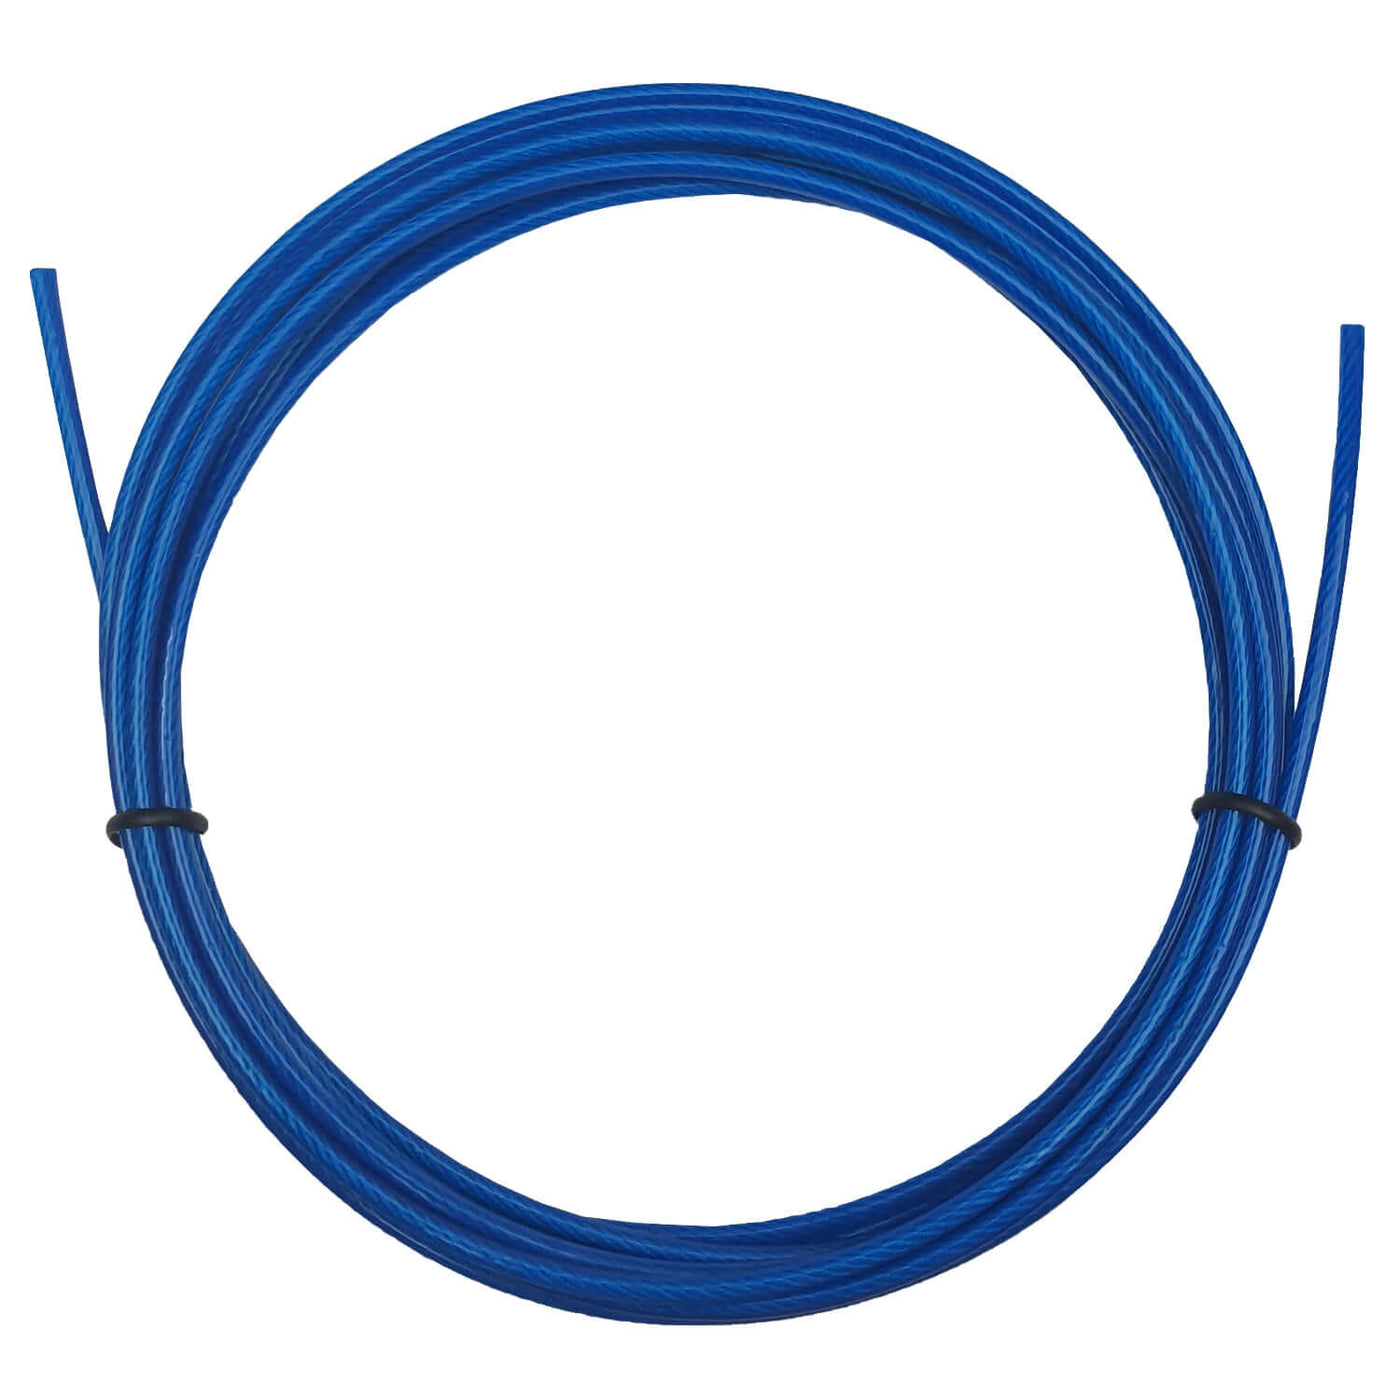 Murgs Replacement Skipping Rope Cable 2.5mm Blue